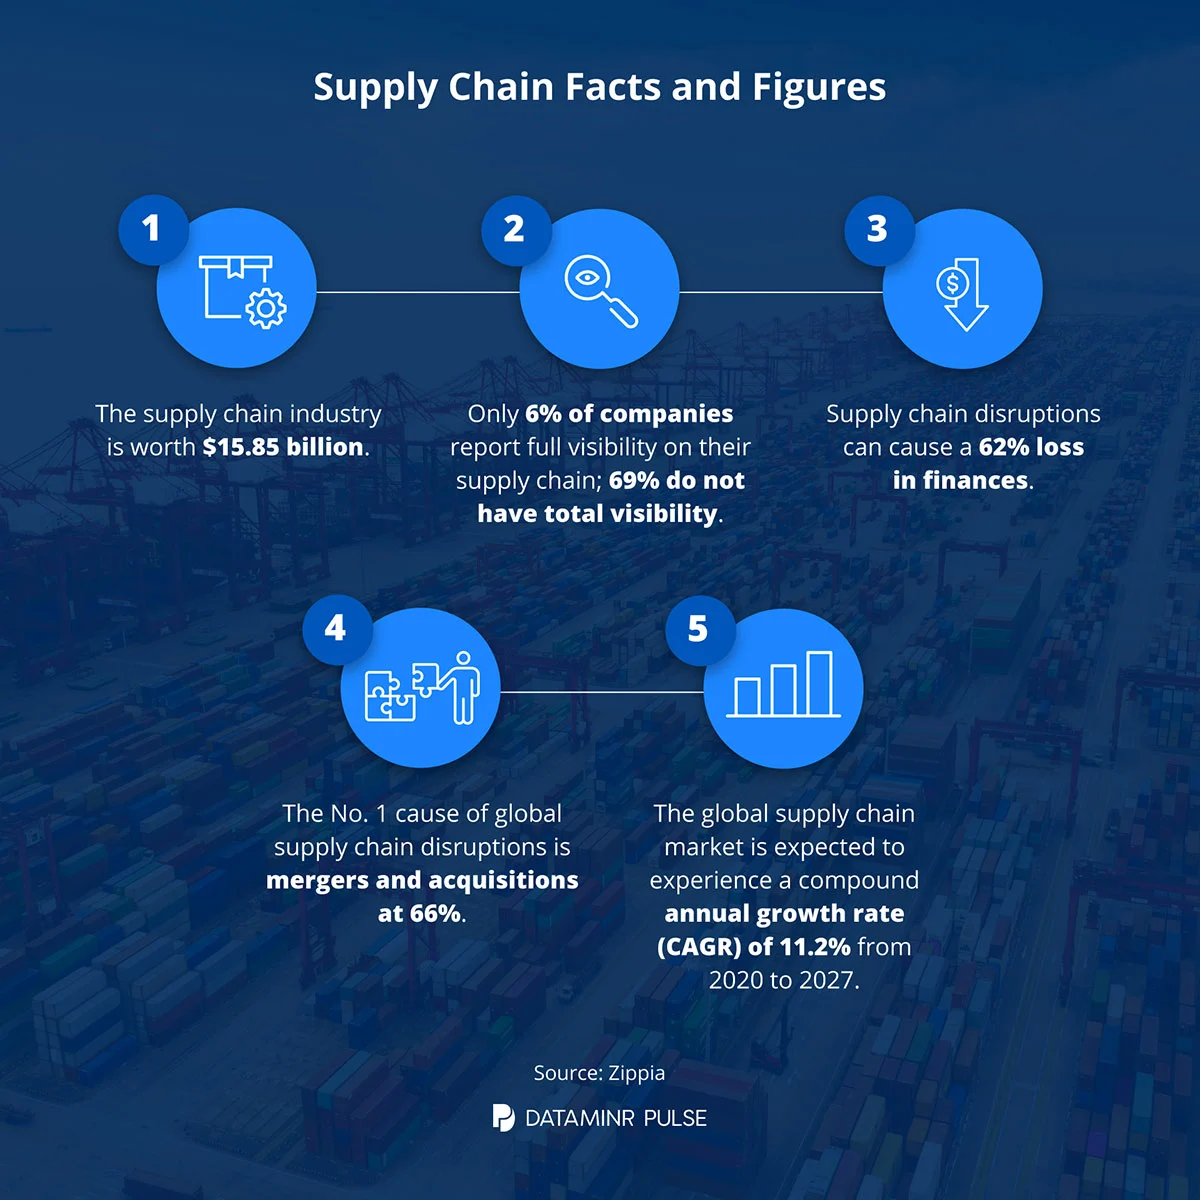 Supply Chain Facts and Figures